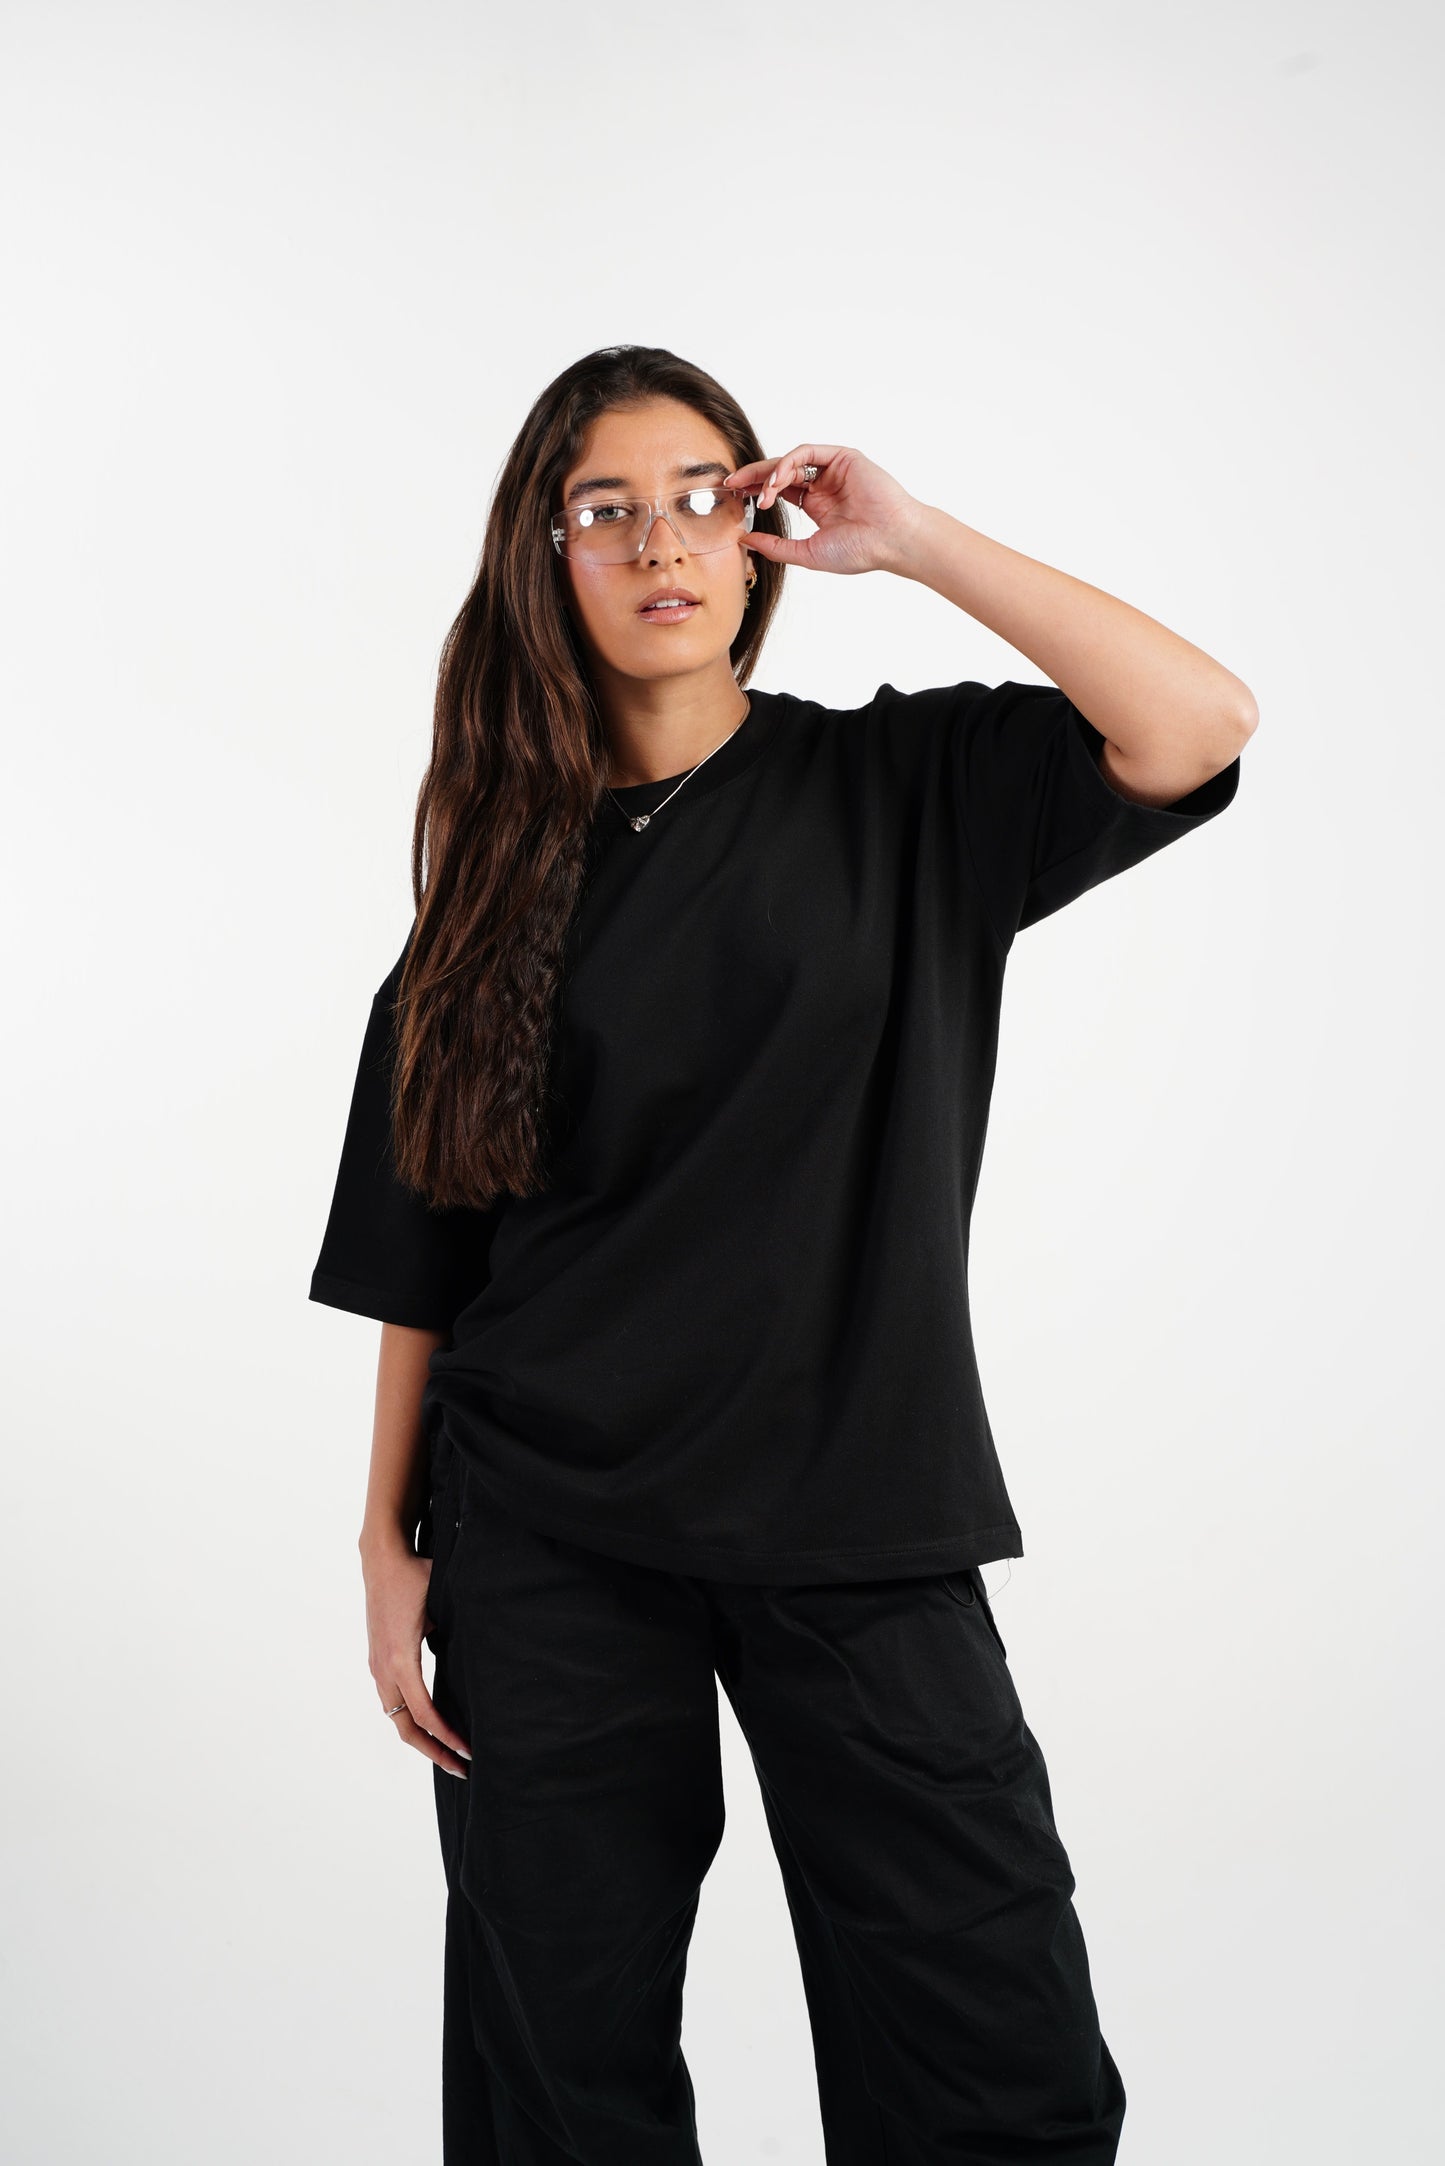 BLACK ORGANDY OVER-SIZED T-SHIRT